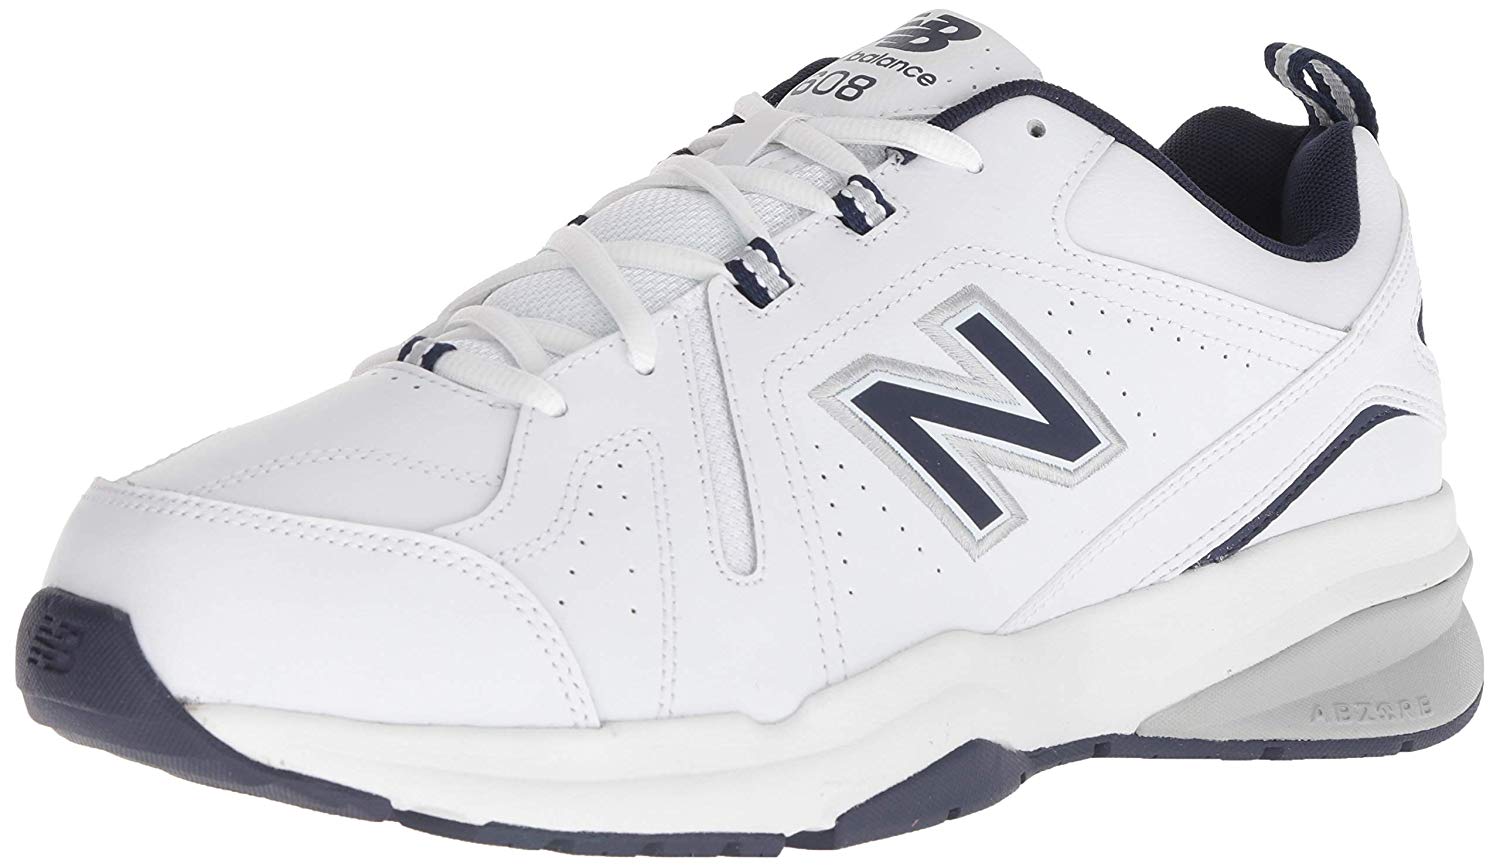 New Balance Mens MX608 Low Top Lace Up Walking Shoes, White/Navy, Size ...